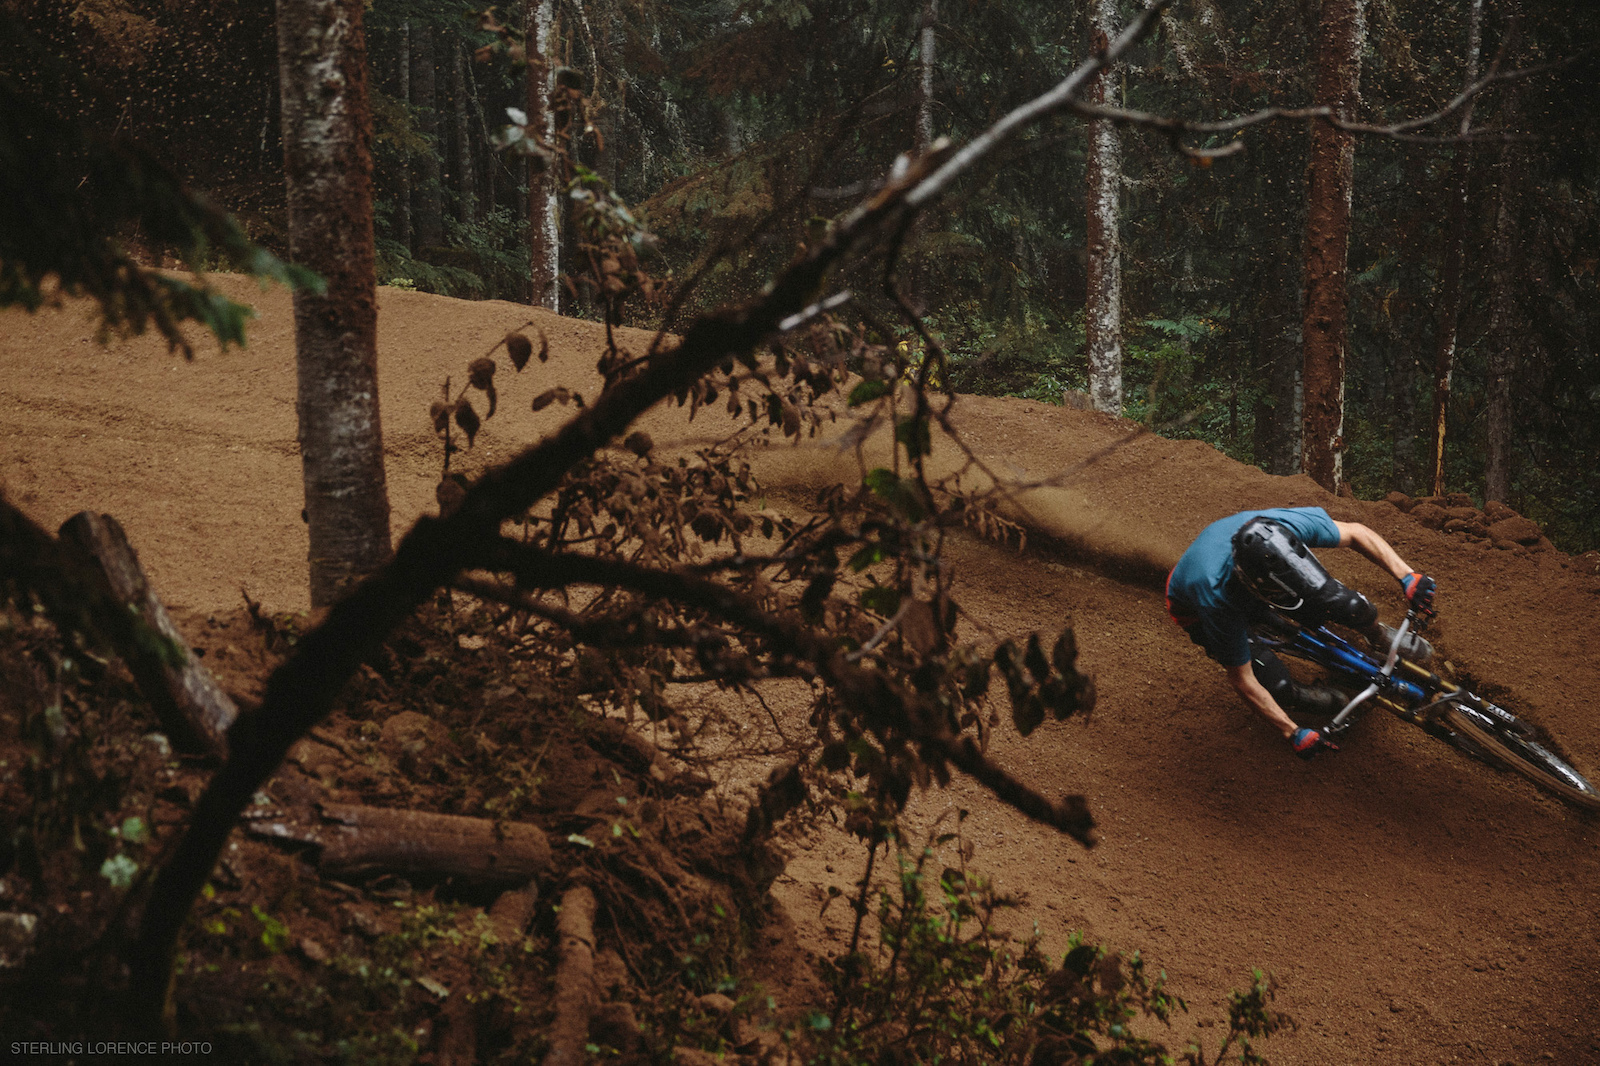 Thomas Vanderham at Whistler Mountain Bike Park for the dirt blizzard segment of Unreal by Anthill films.